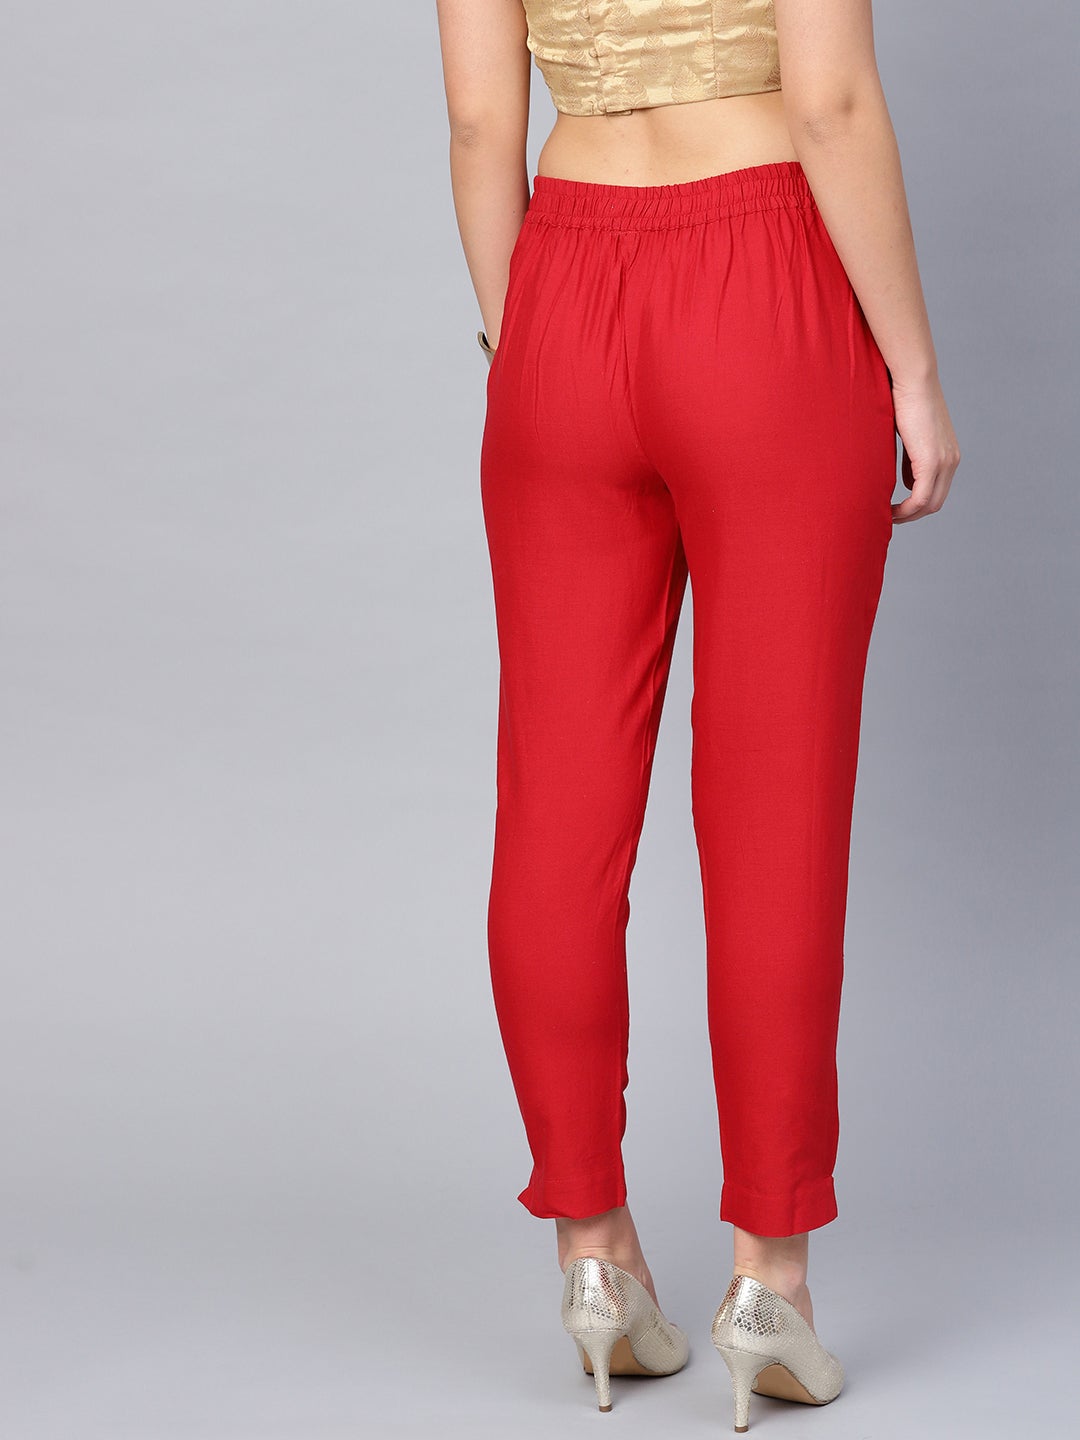 Juniper Red Solid Cotton Flex Slim Fit Women Pants With Two Pockets